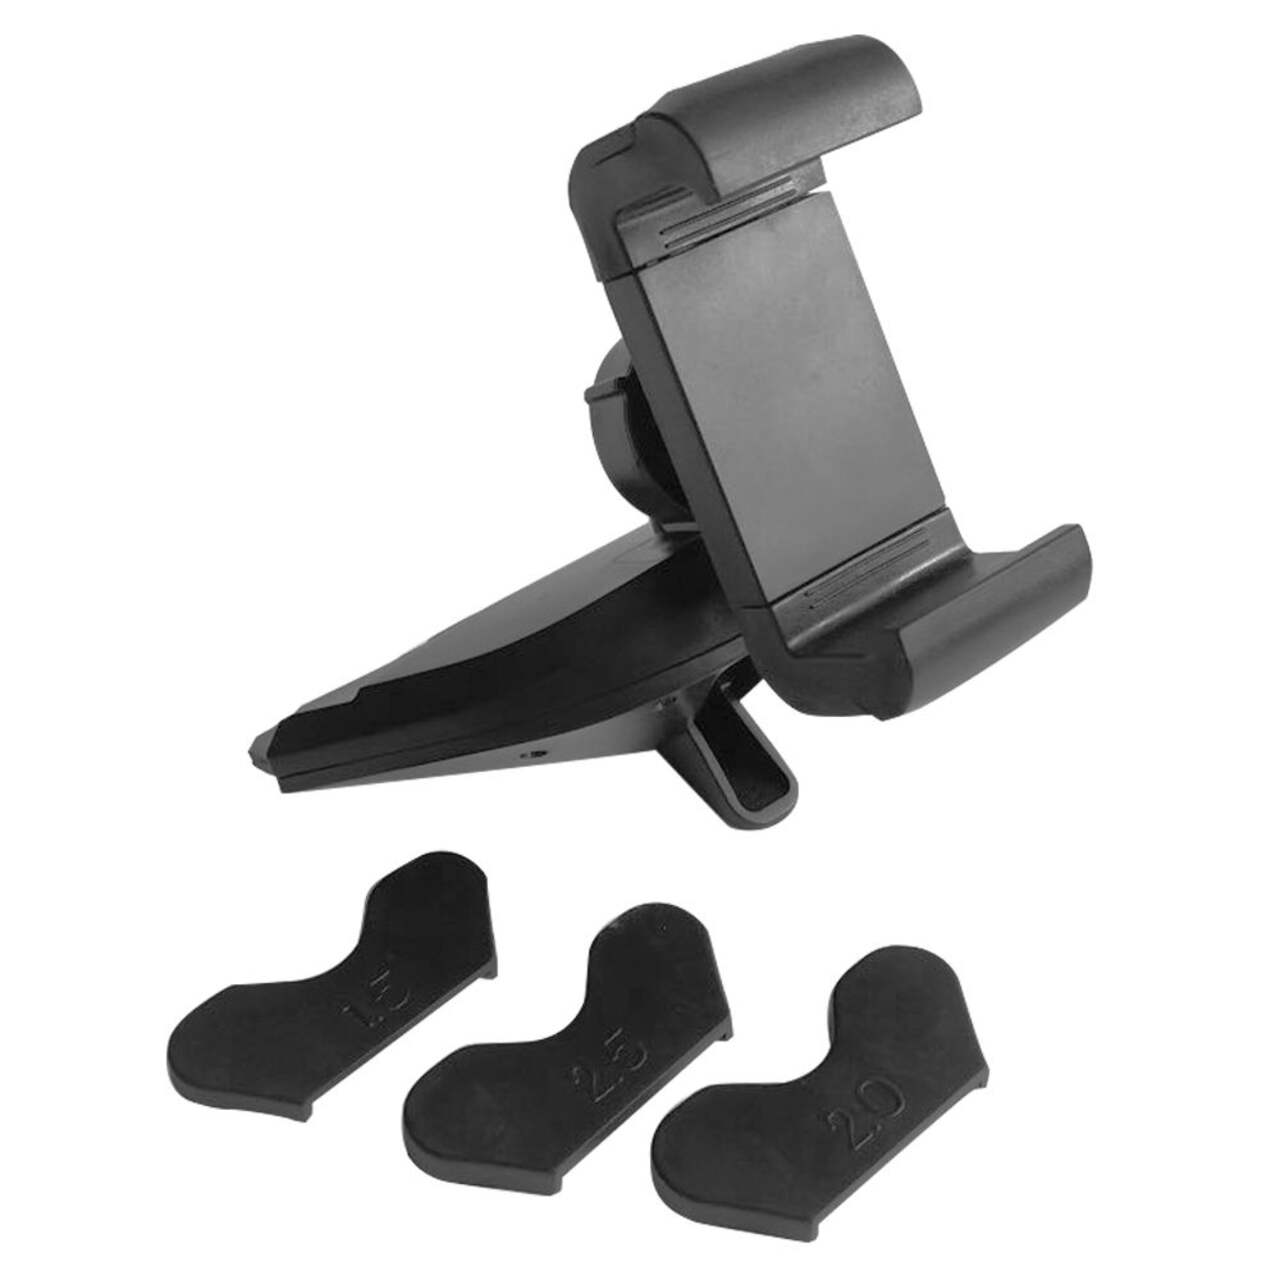 Bluehive Universal Bike Phone Holder for Mobile Devices